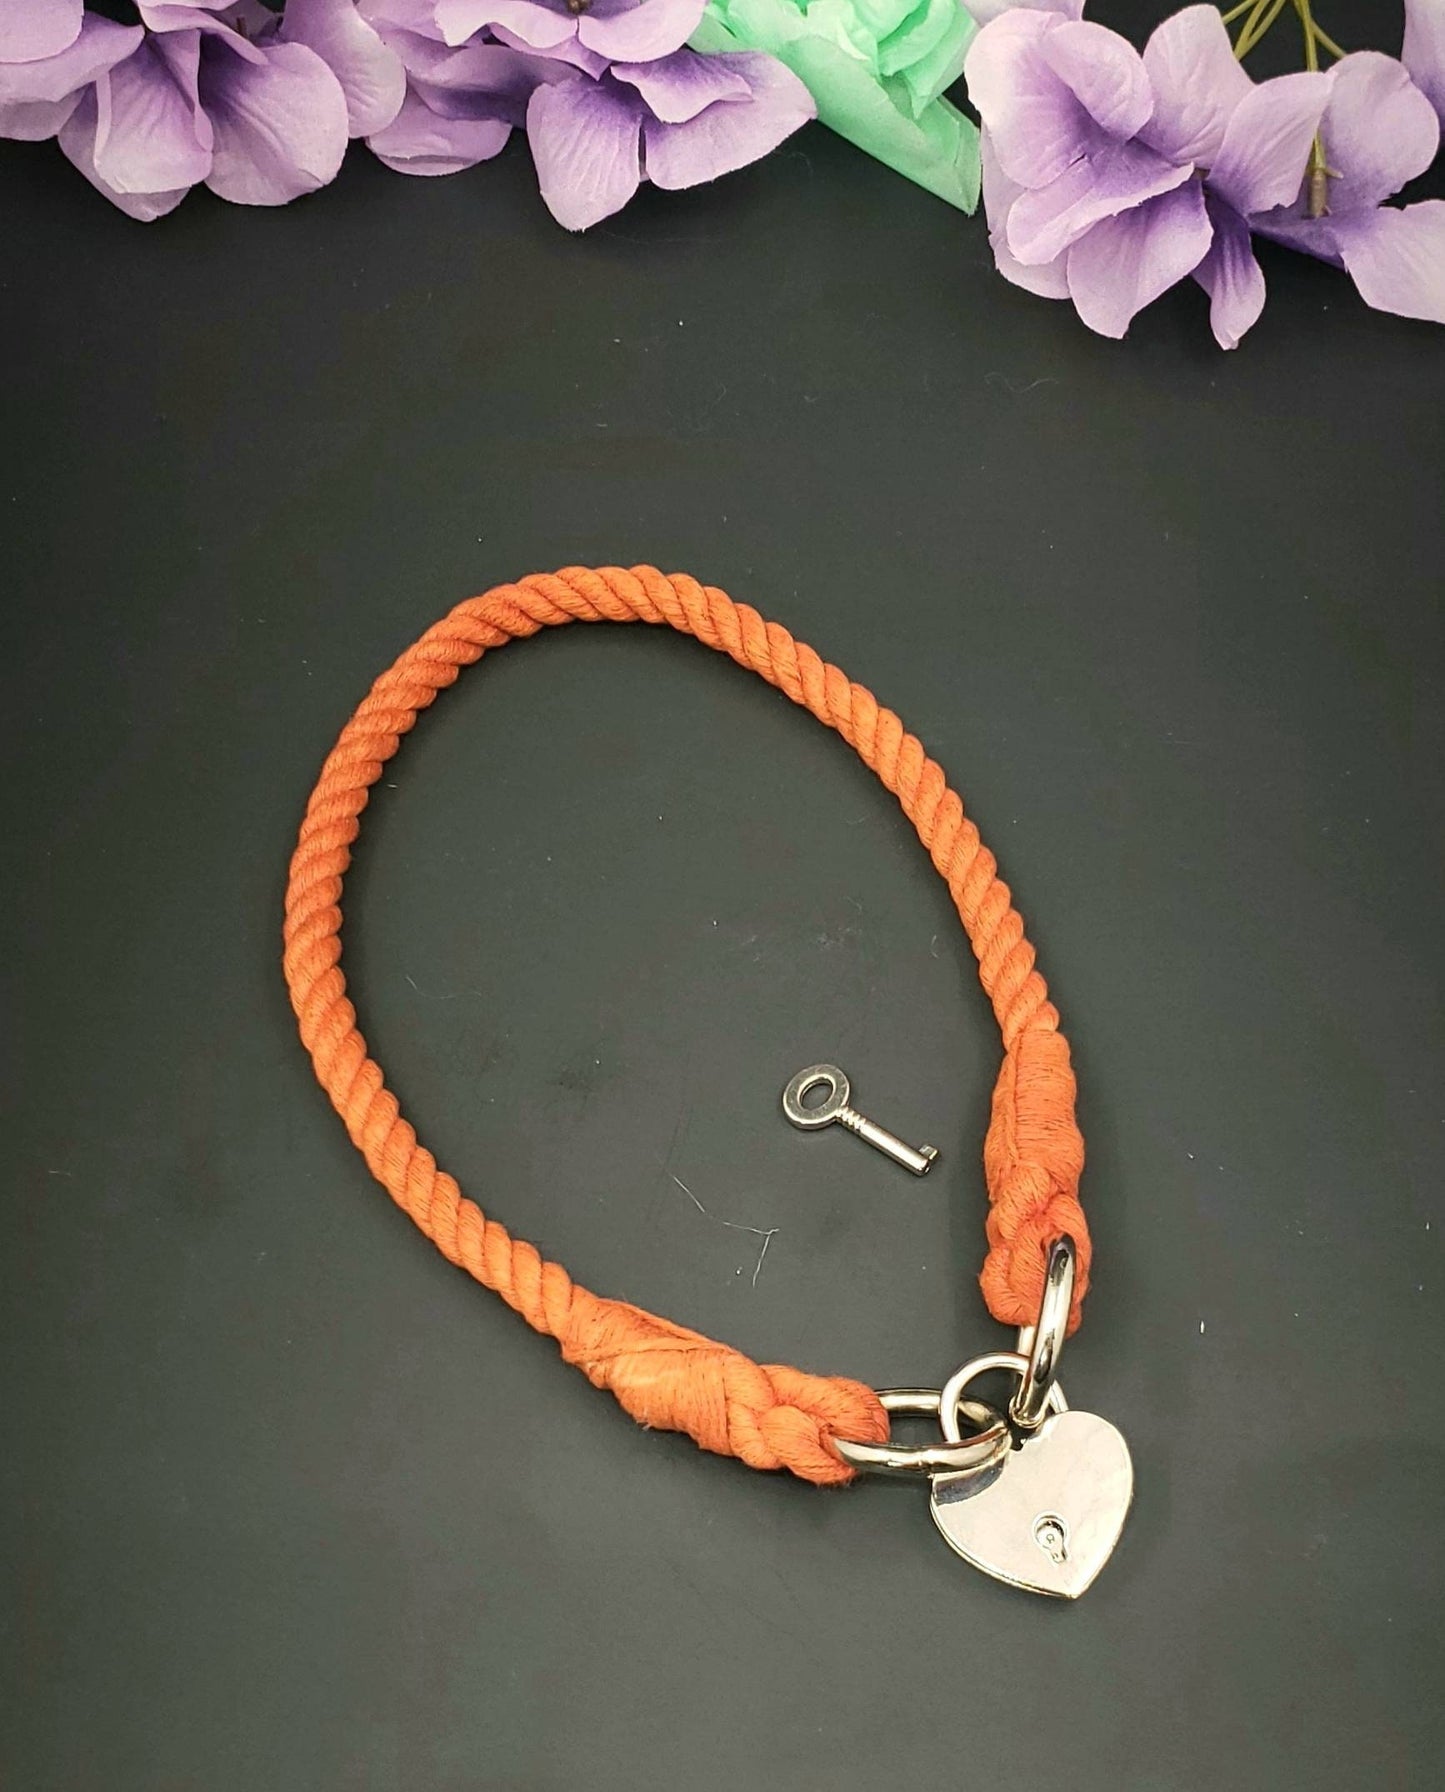 Orange Heart Locking Collar - BDSM Rope Choker - Submissive Cotton Collar | Novelty Choker Accessory for Roleplay